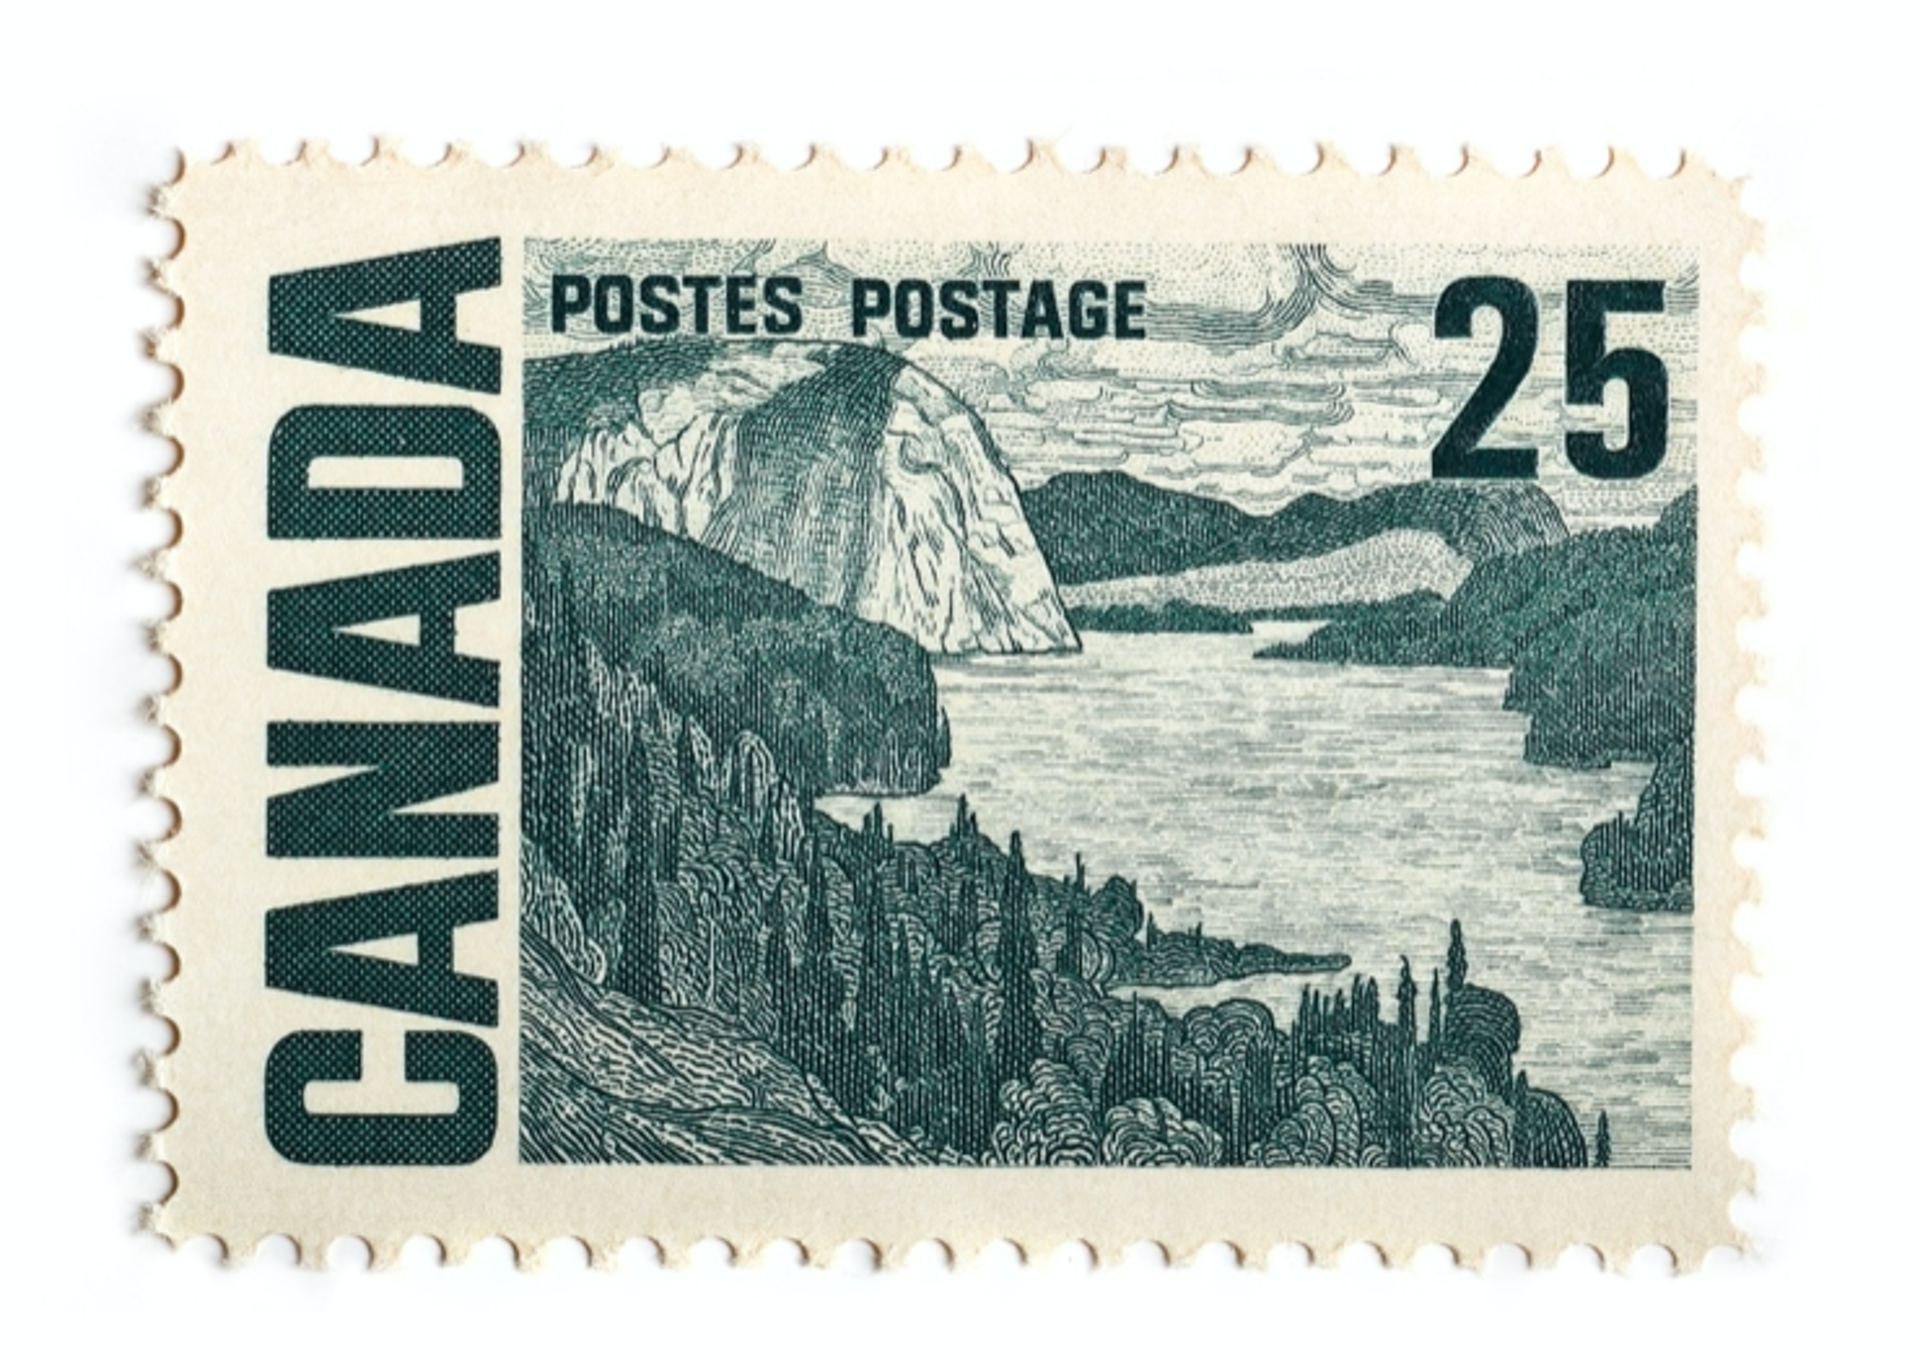 Canada Stamp 25 cents by Peter Andrew Lusztyk | Collectibles